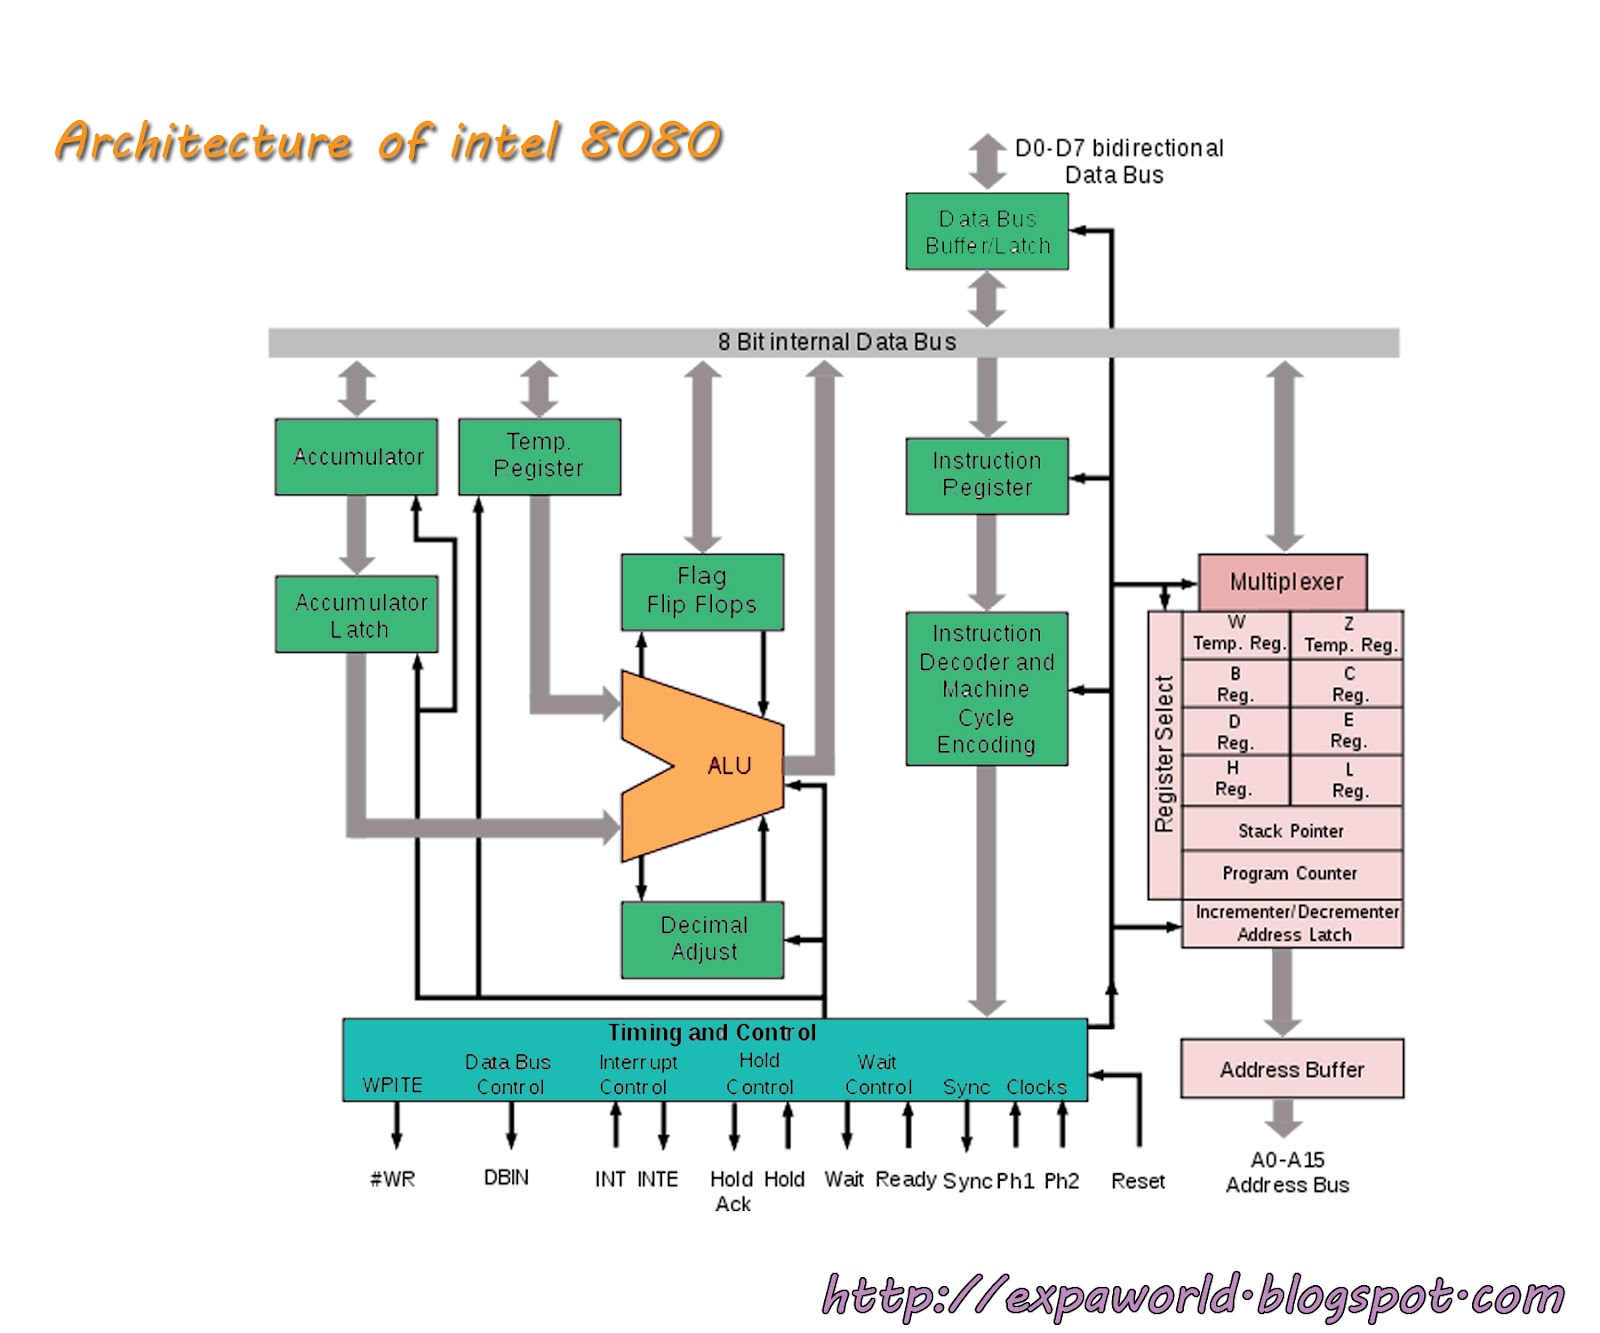 WORLD OF EMBEDDED: Intel-8080 Microprocessor & Architecture